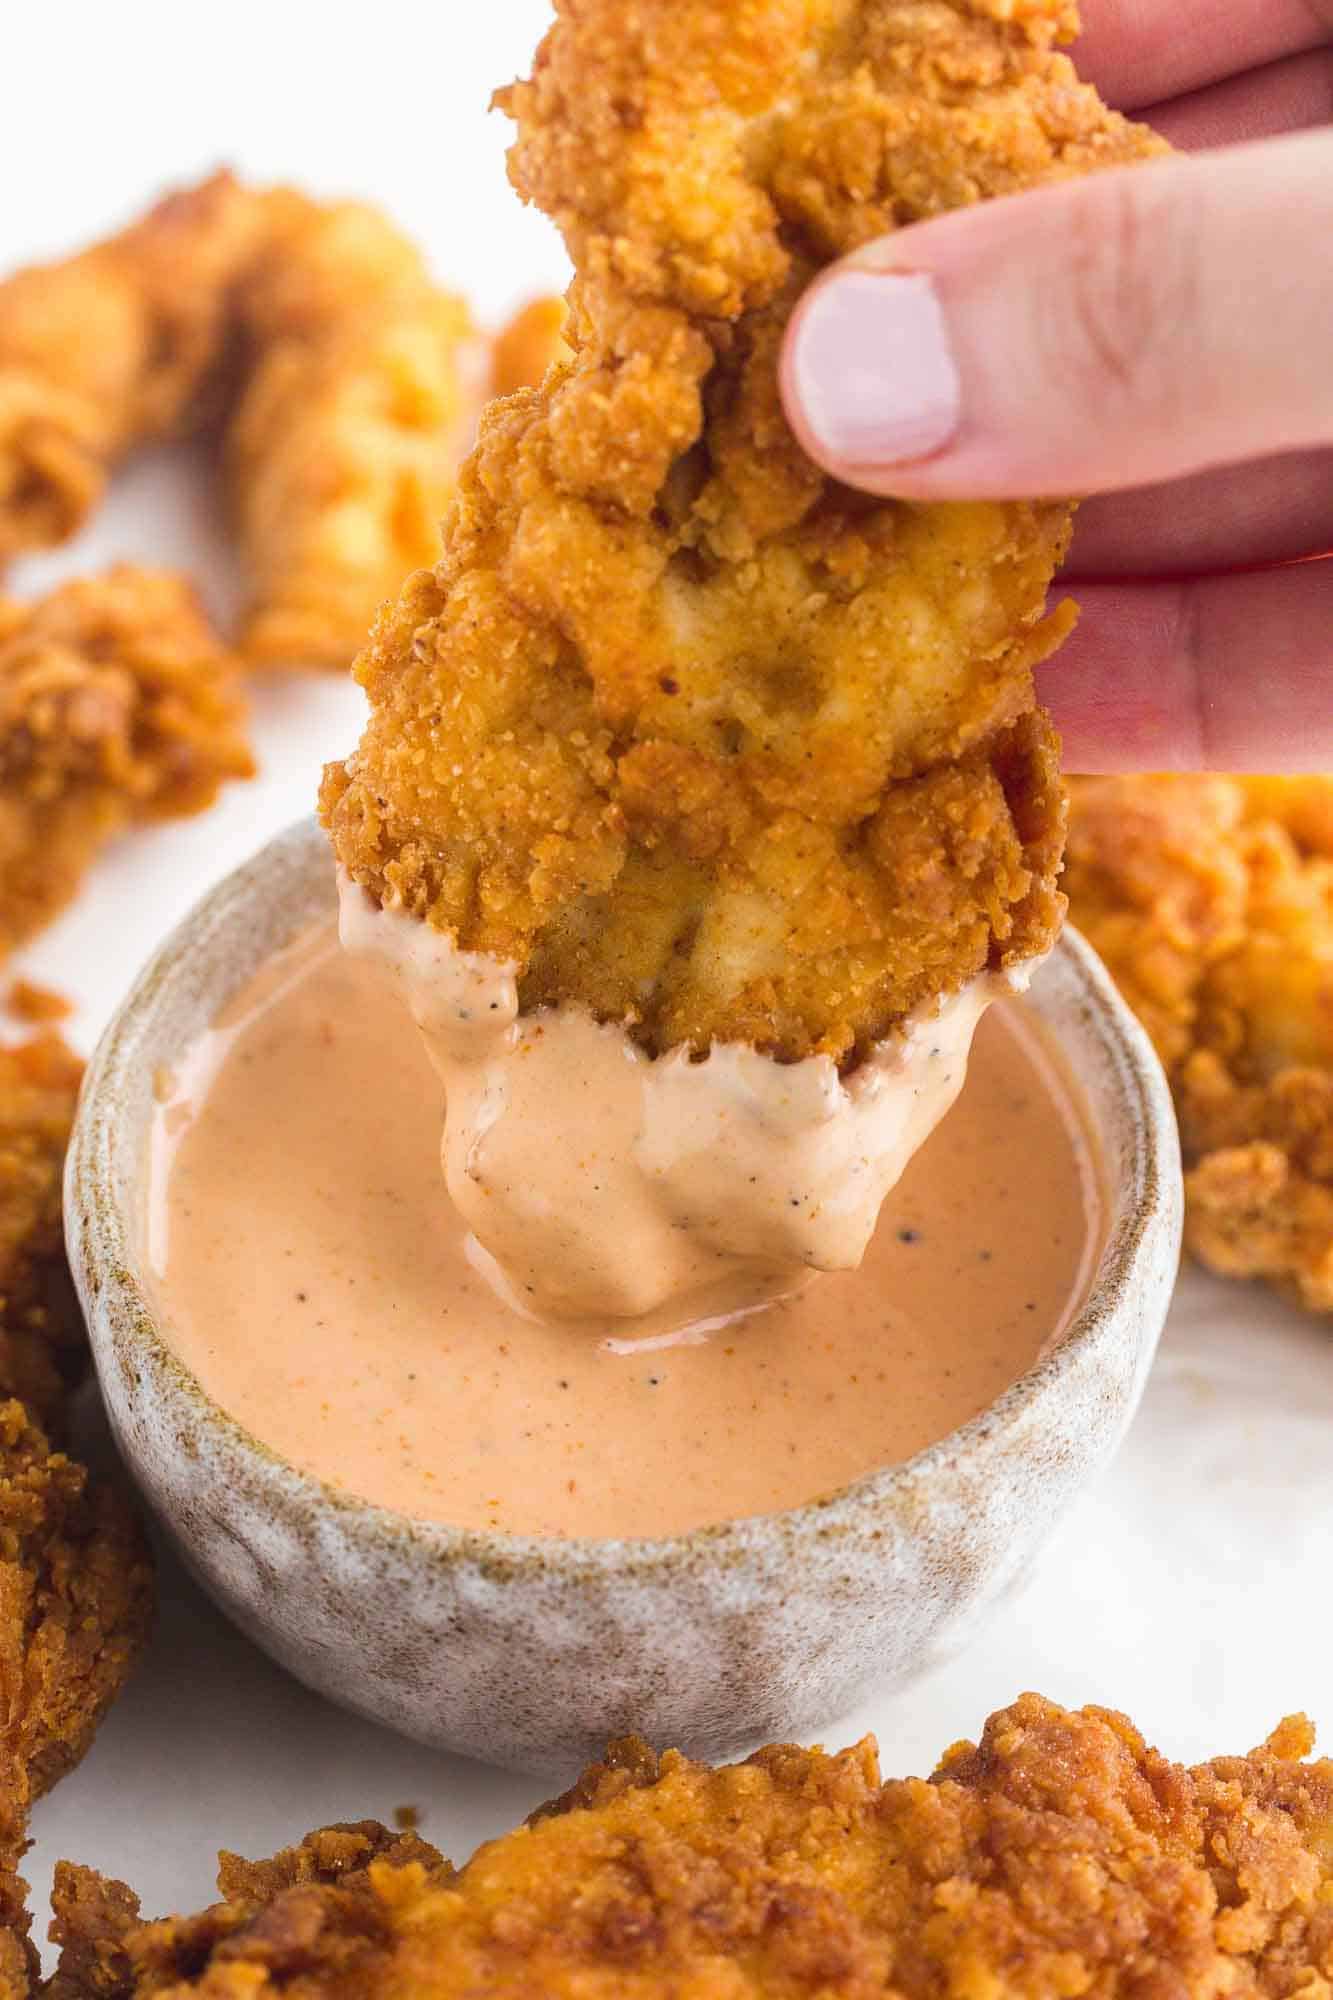 Raising Cane's sauce with a chicken nugget